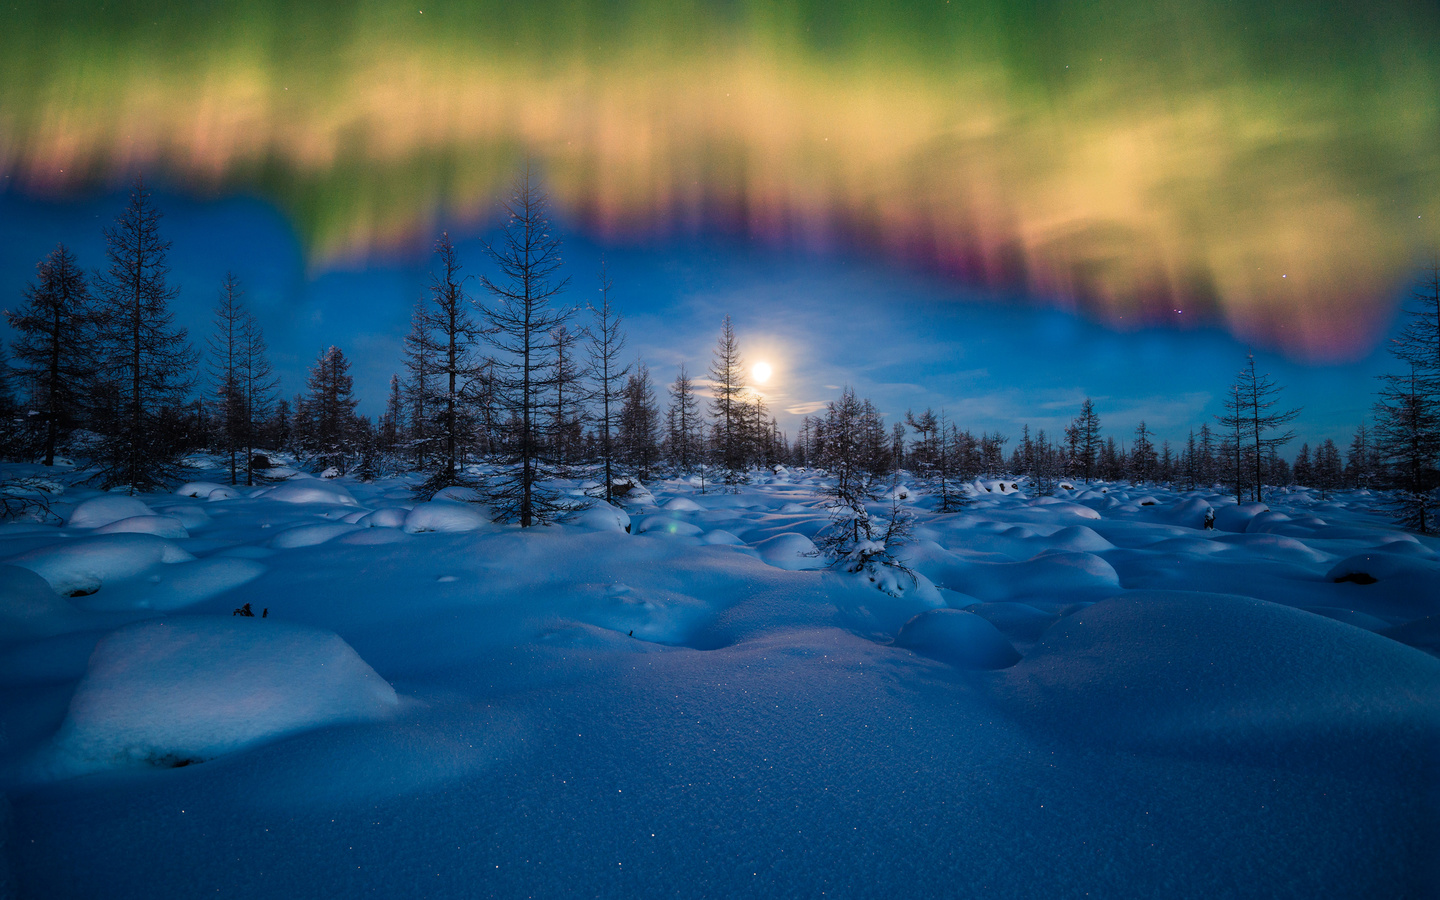 , , , , , ,  , the sky, night, snow, forest, winter, landscape, northern lights